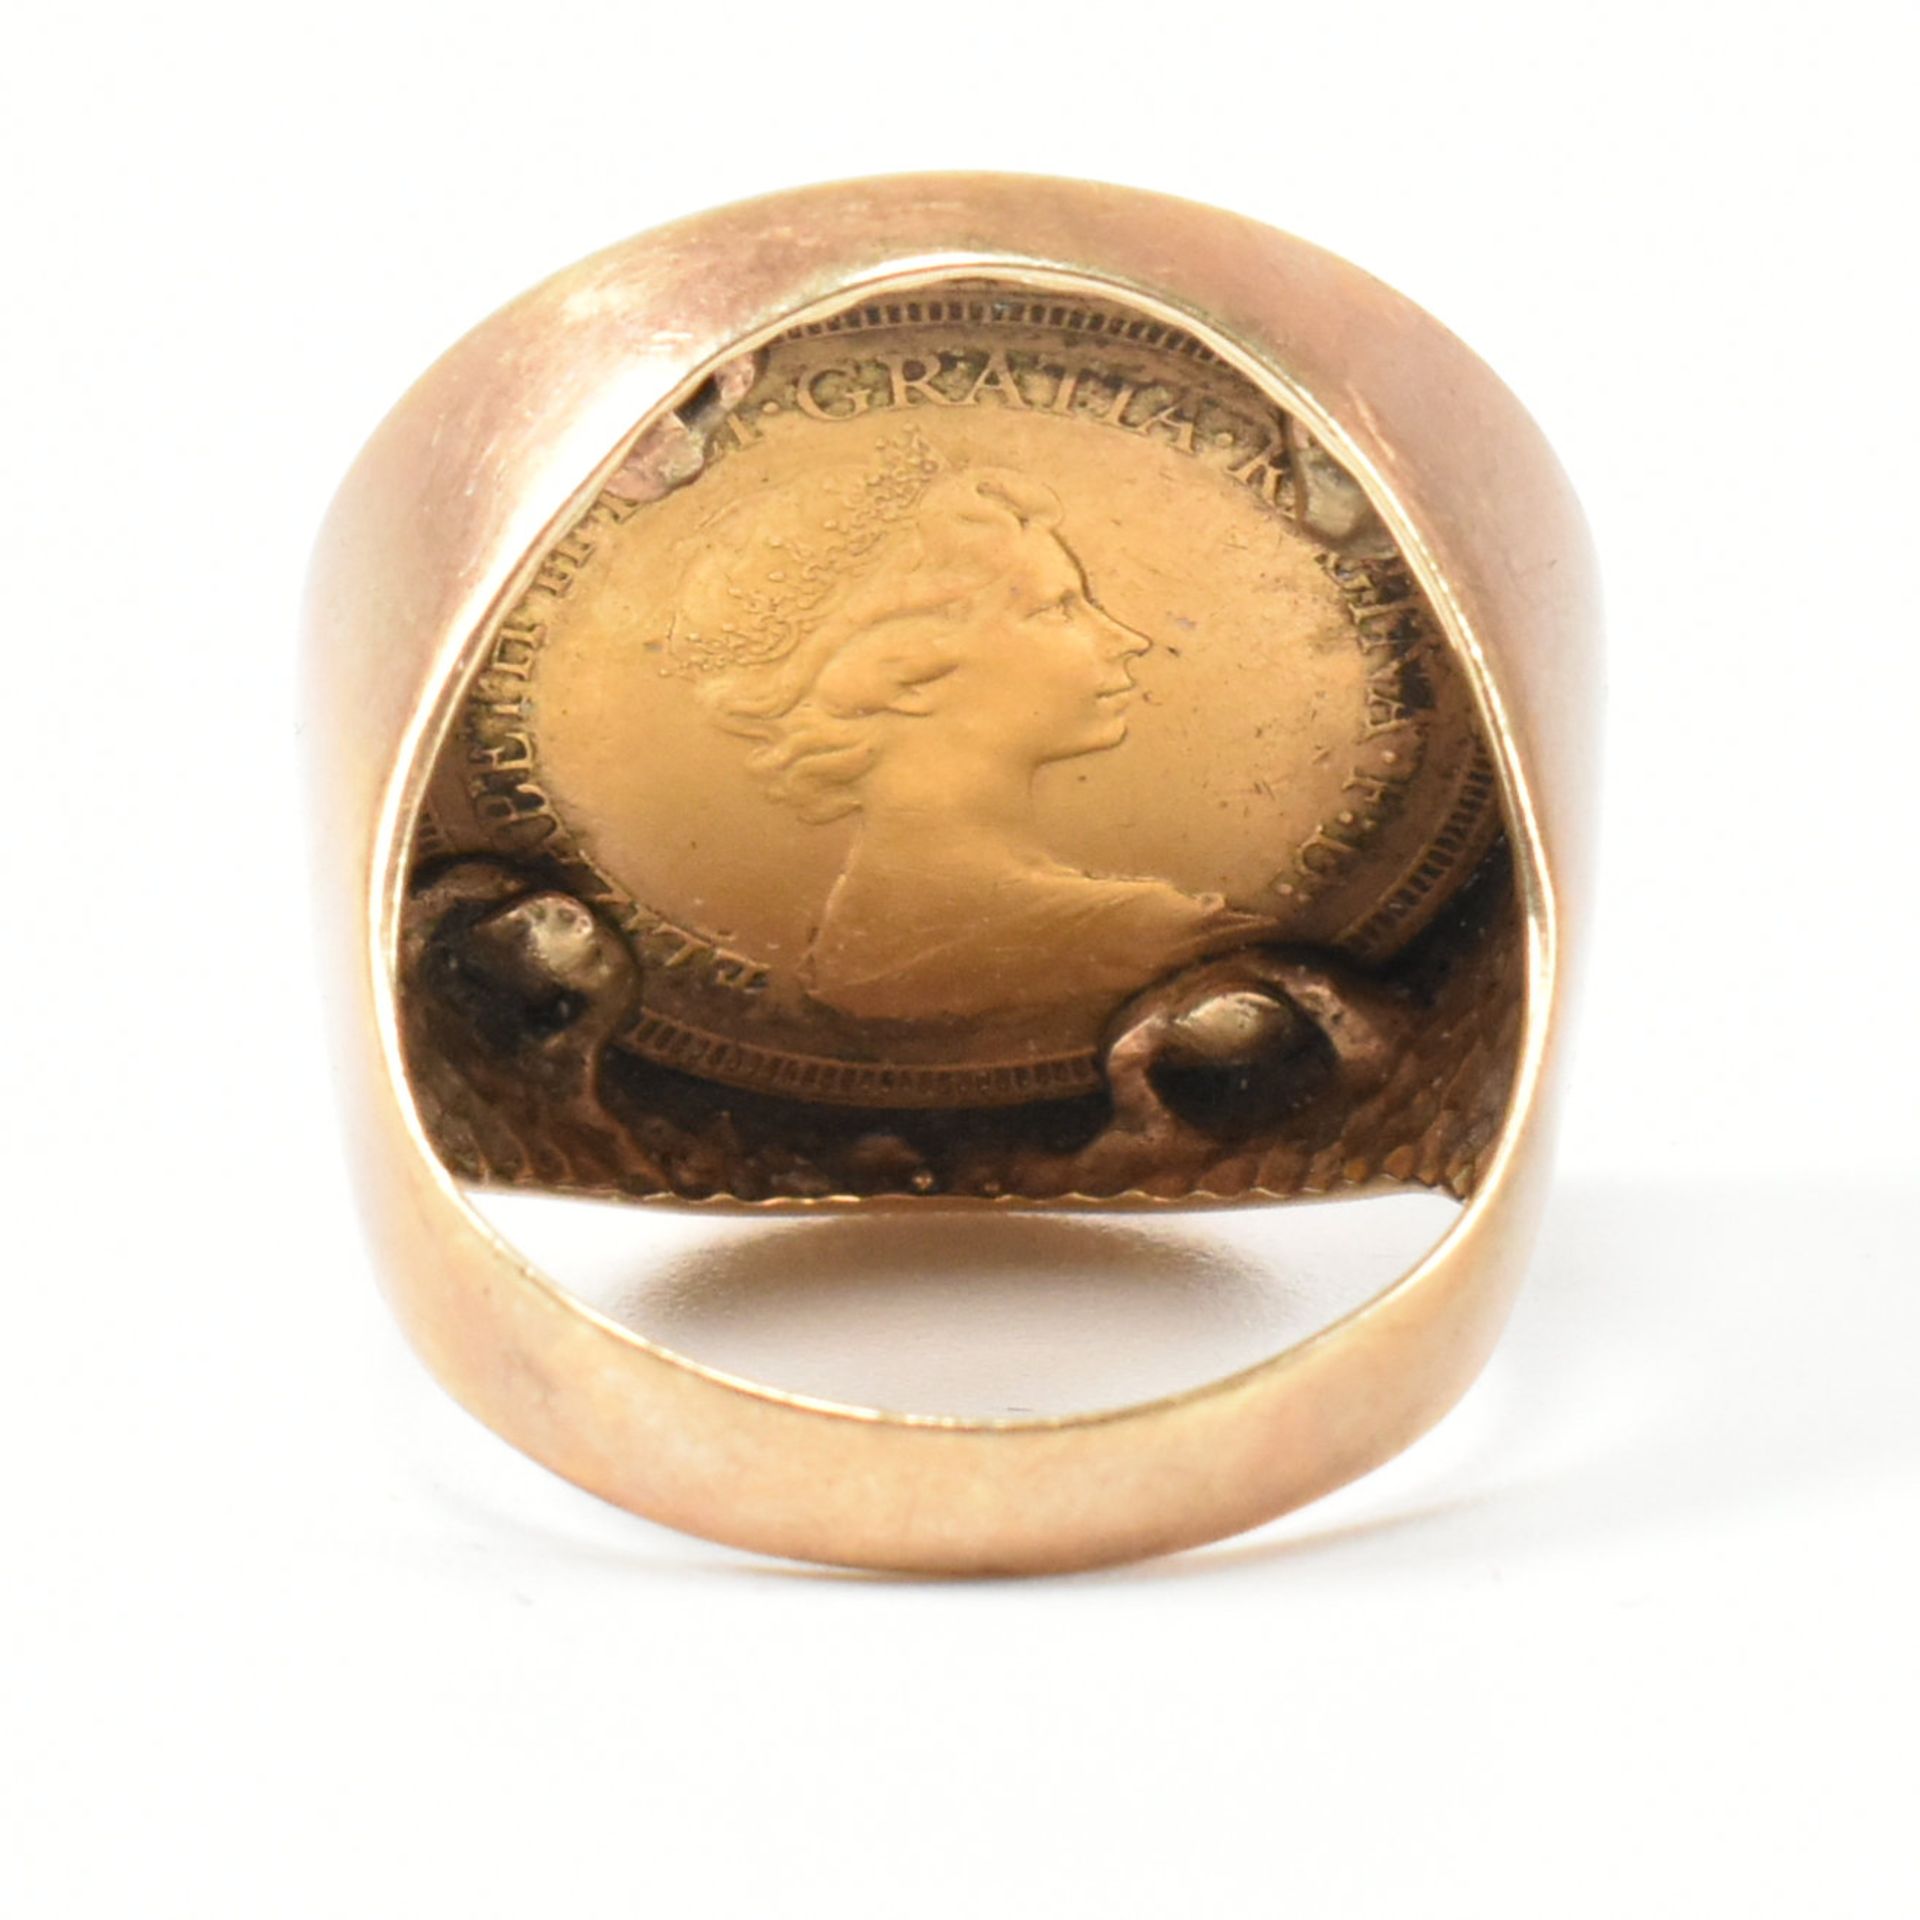 HALLMARKED 9CT GOLD FULL SOVEREIGN MOUNTED SIGNET RING - Image 4 of 7